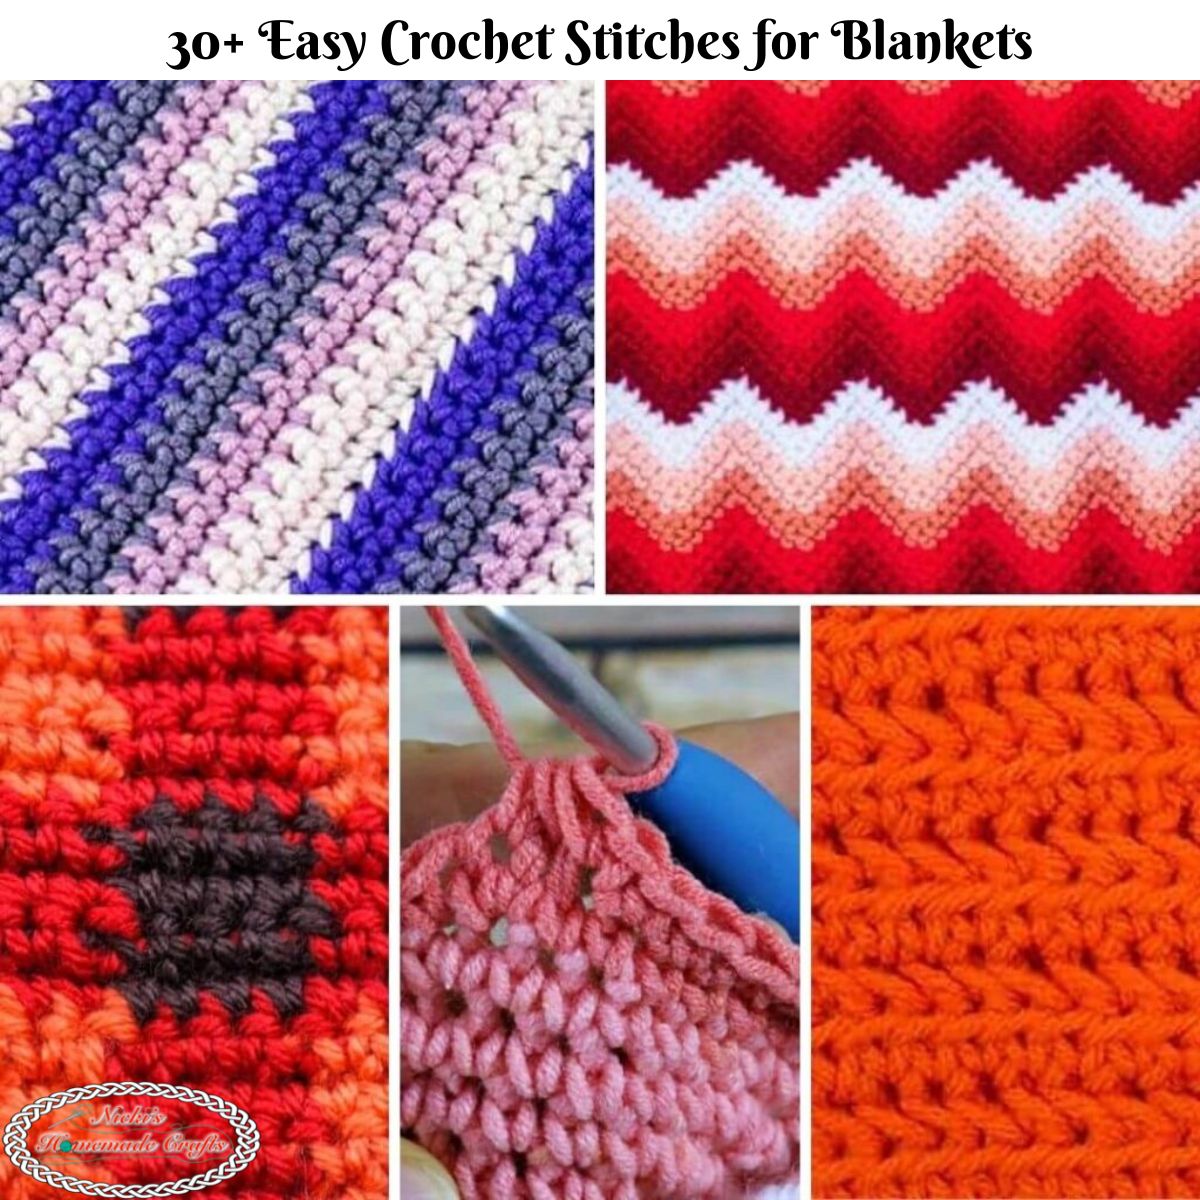 Add Texture to Your Projects: 5 Unique Textured Crochet Stitches